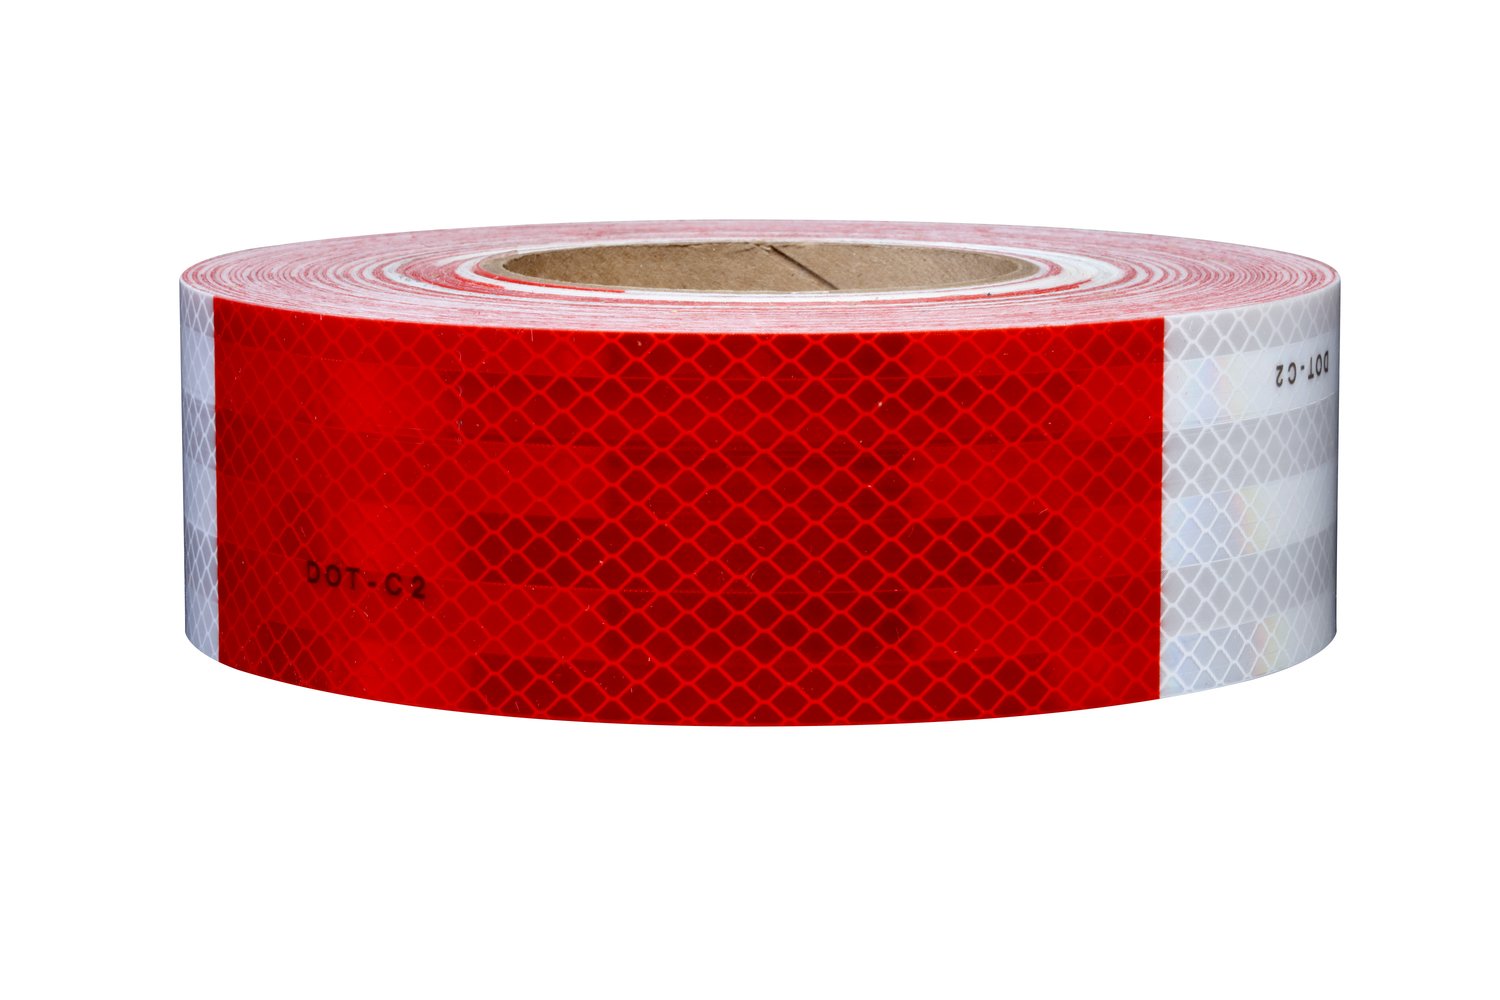 3M Diamond Grade Conspicuity Markings 983-326 Red/White, HH Logo, 2 in x 50 yd, Kiss-Cut Every 12 in